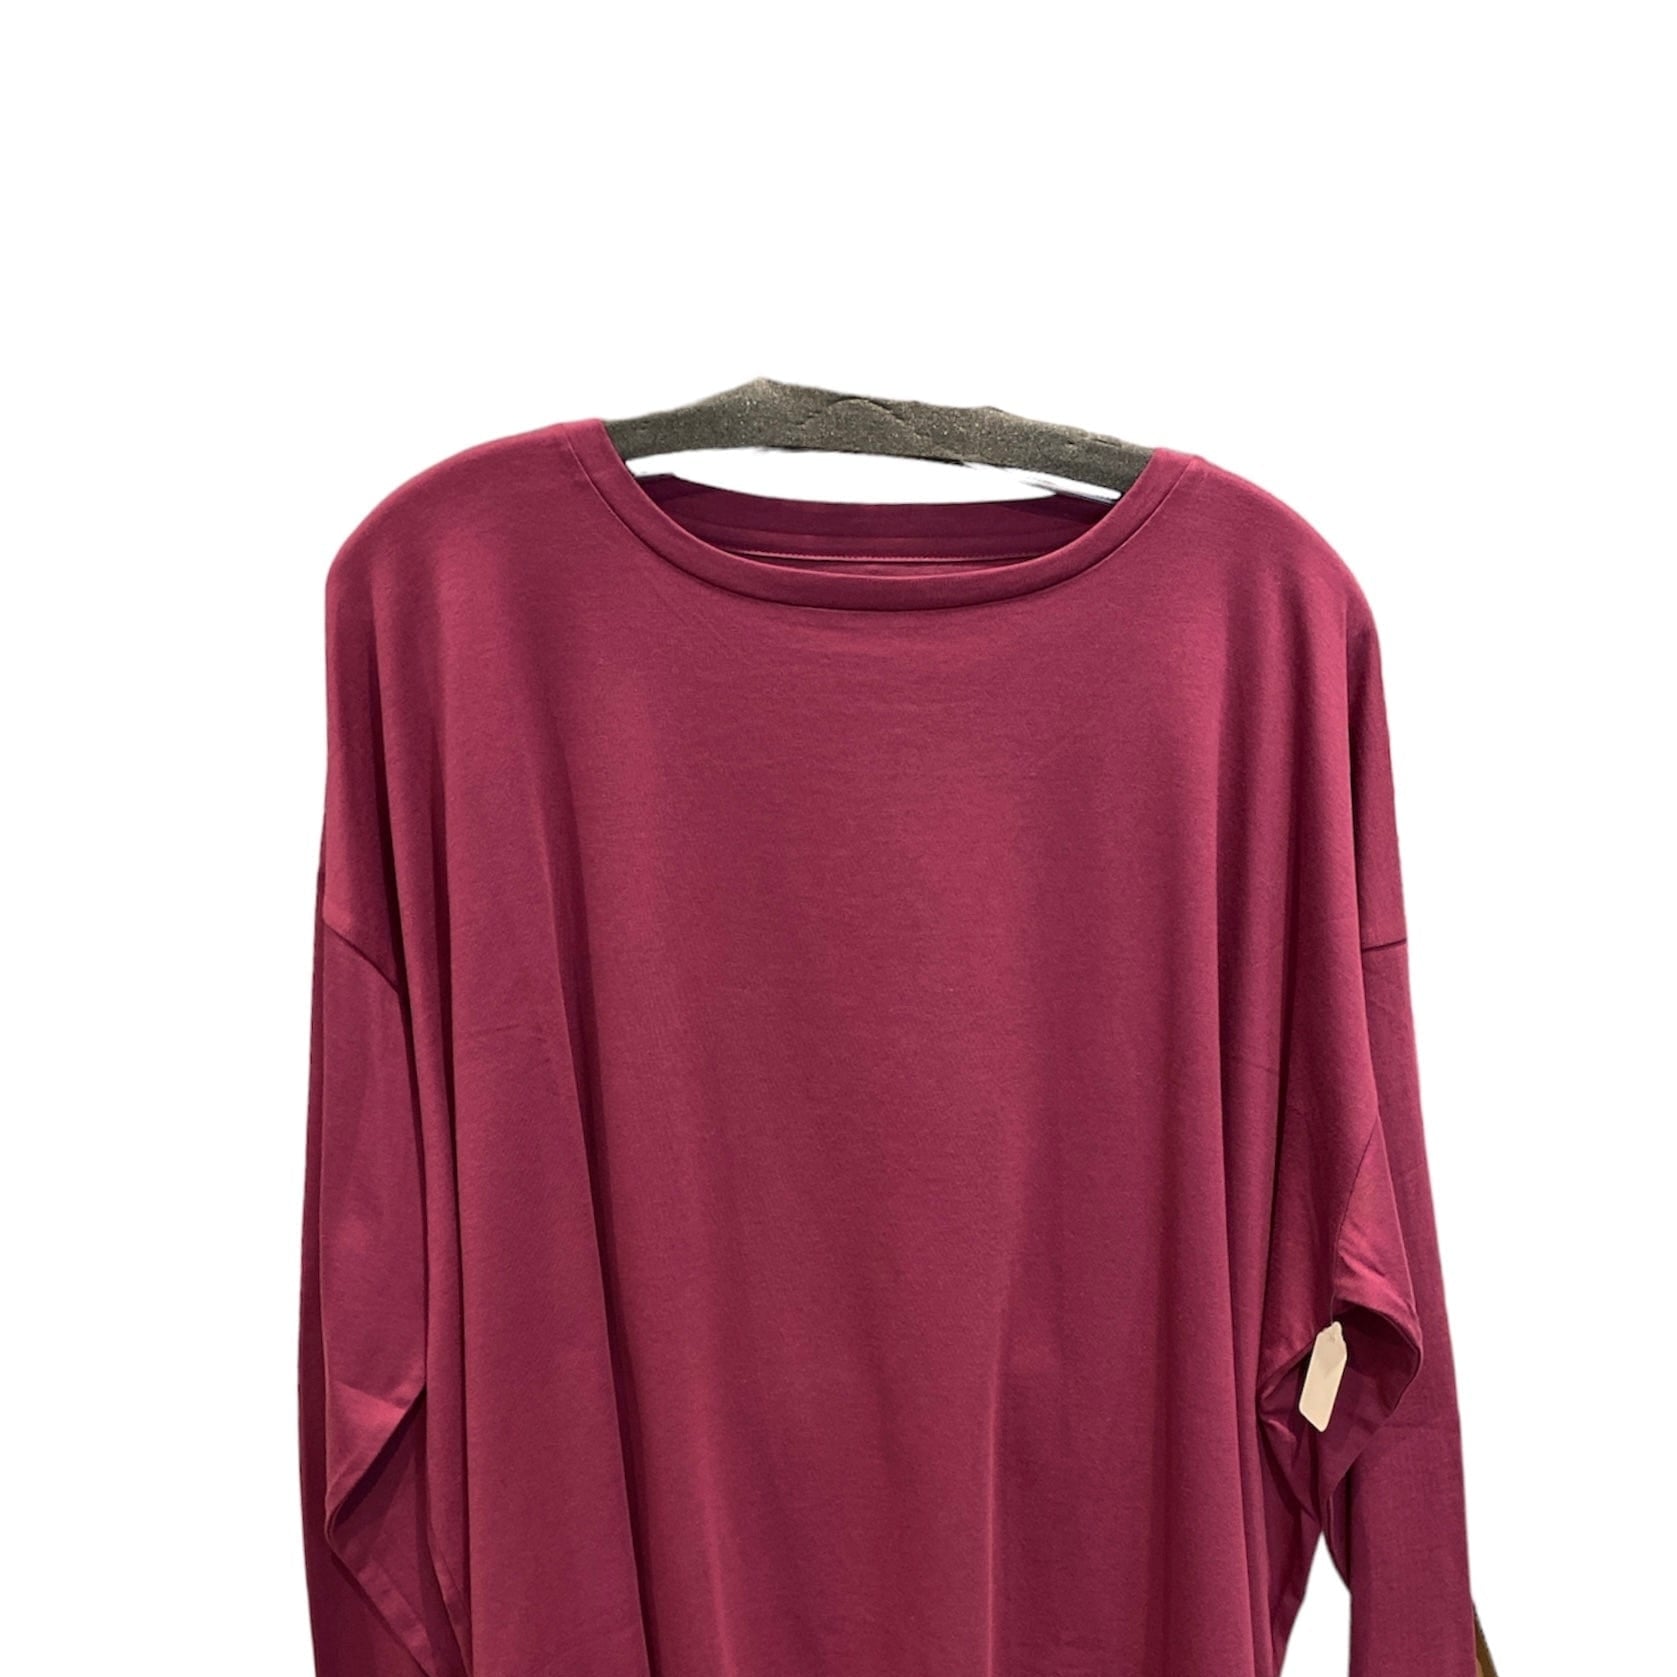 PLANET by Lauren G Women's Shirts & Tops Boysenberry / One Size Planet Boxy Tee O/S